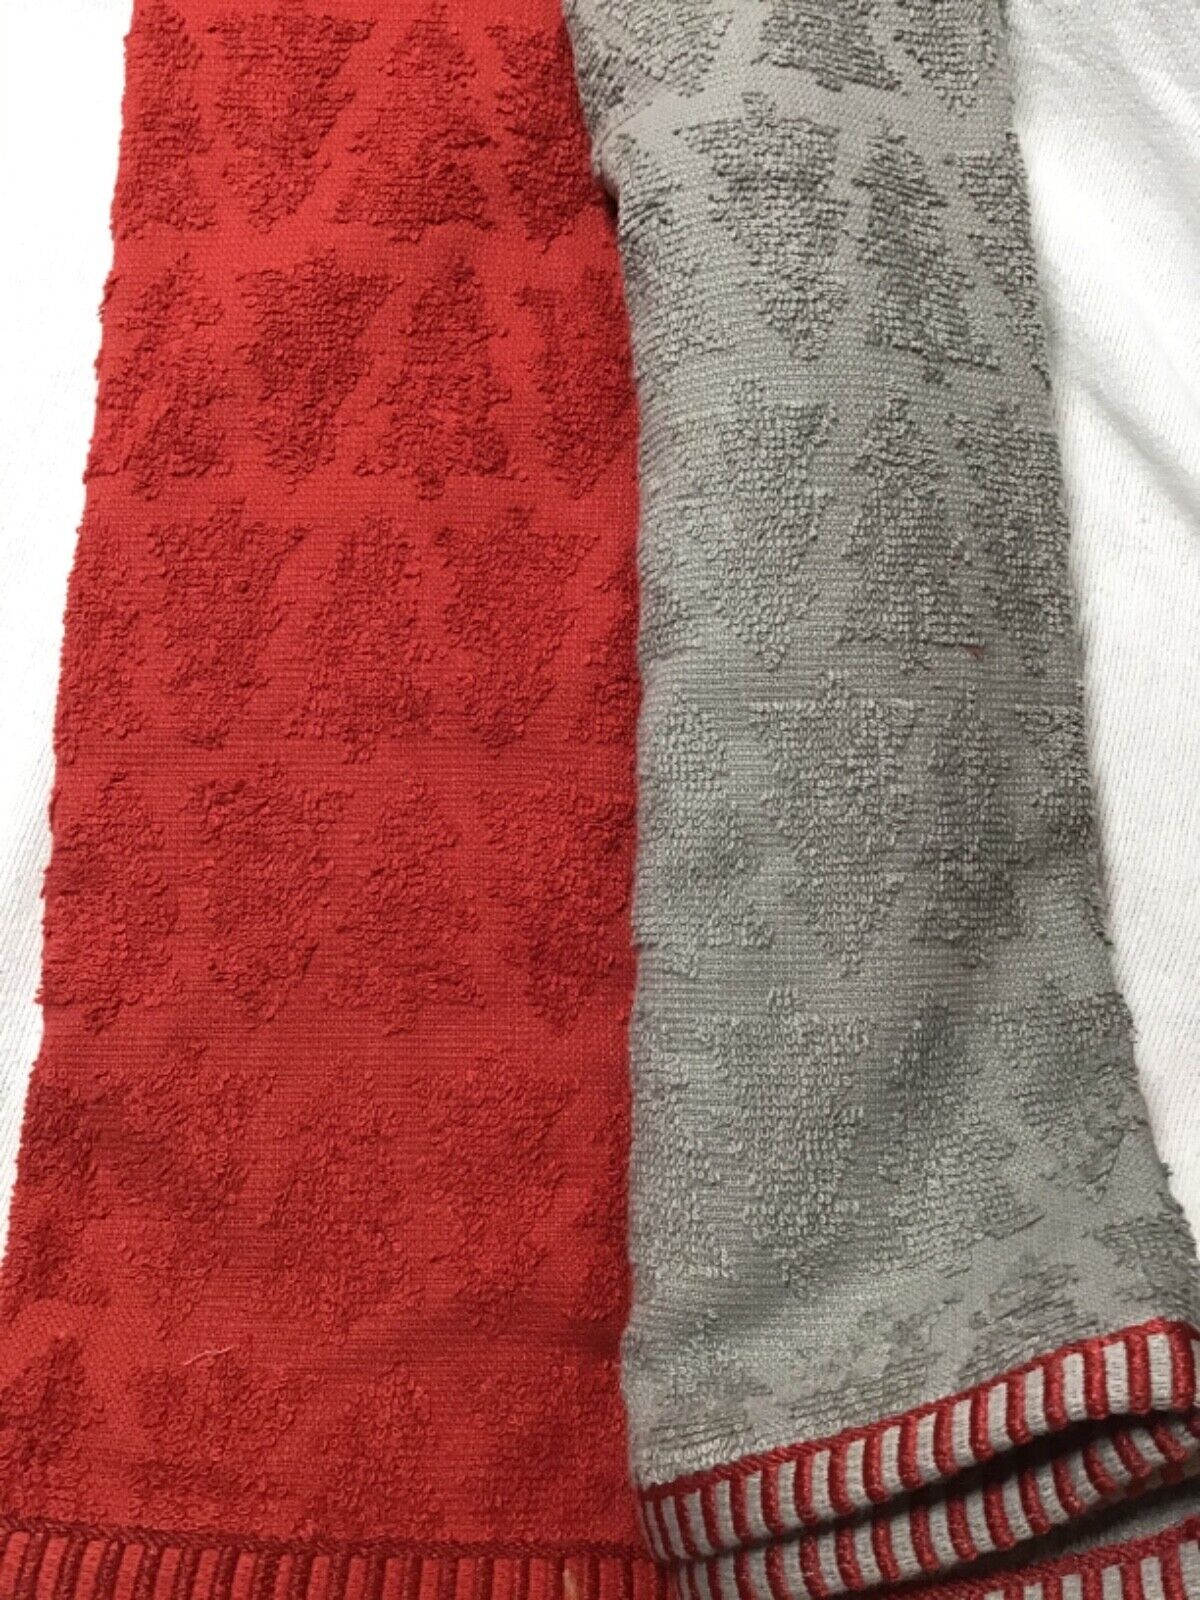 TRULY LOU KITCHEN TOWELS (3) GRAY RED GREEN TREES 18X 28 100% COTTON TERRY  NWT